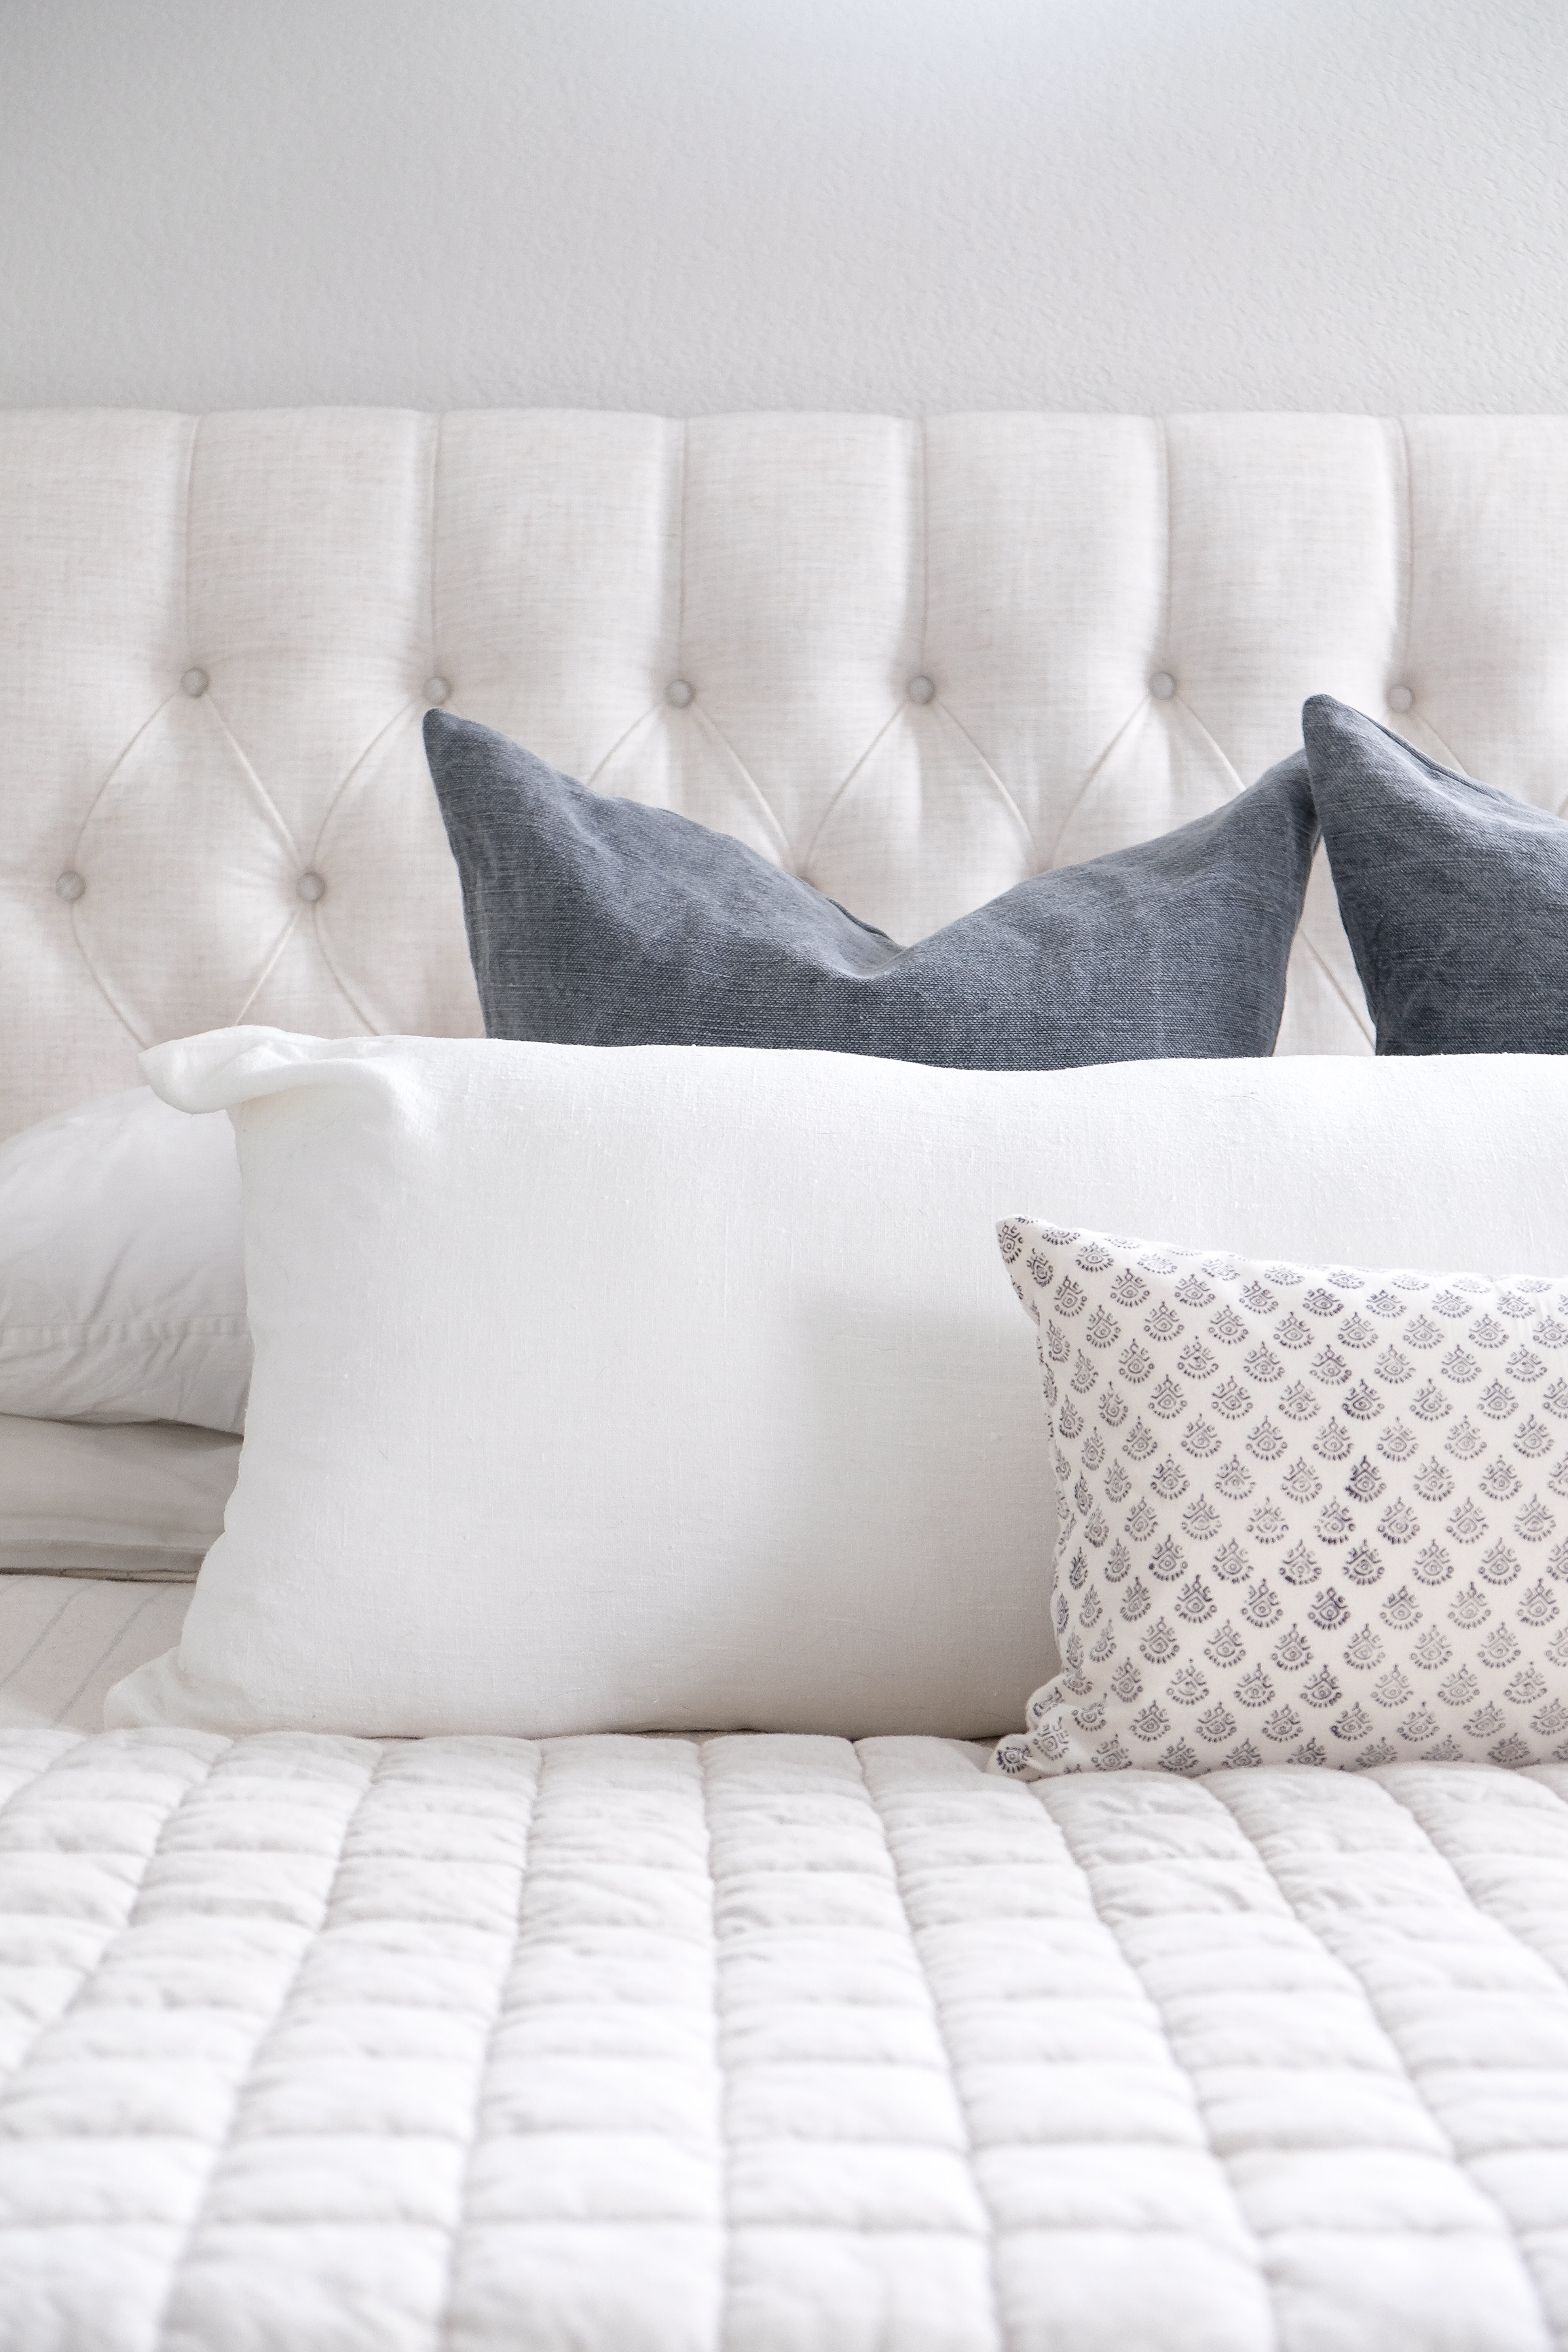 How To Select & Style Throw Pillows Like A Pro - Casually Coastal